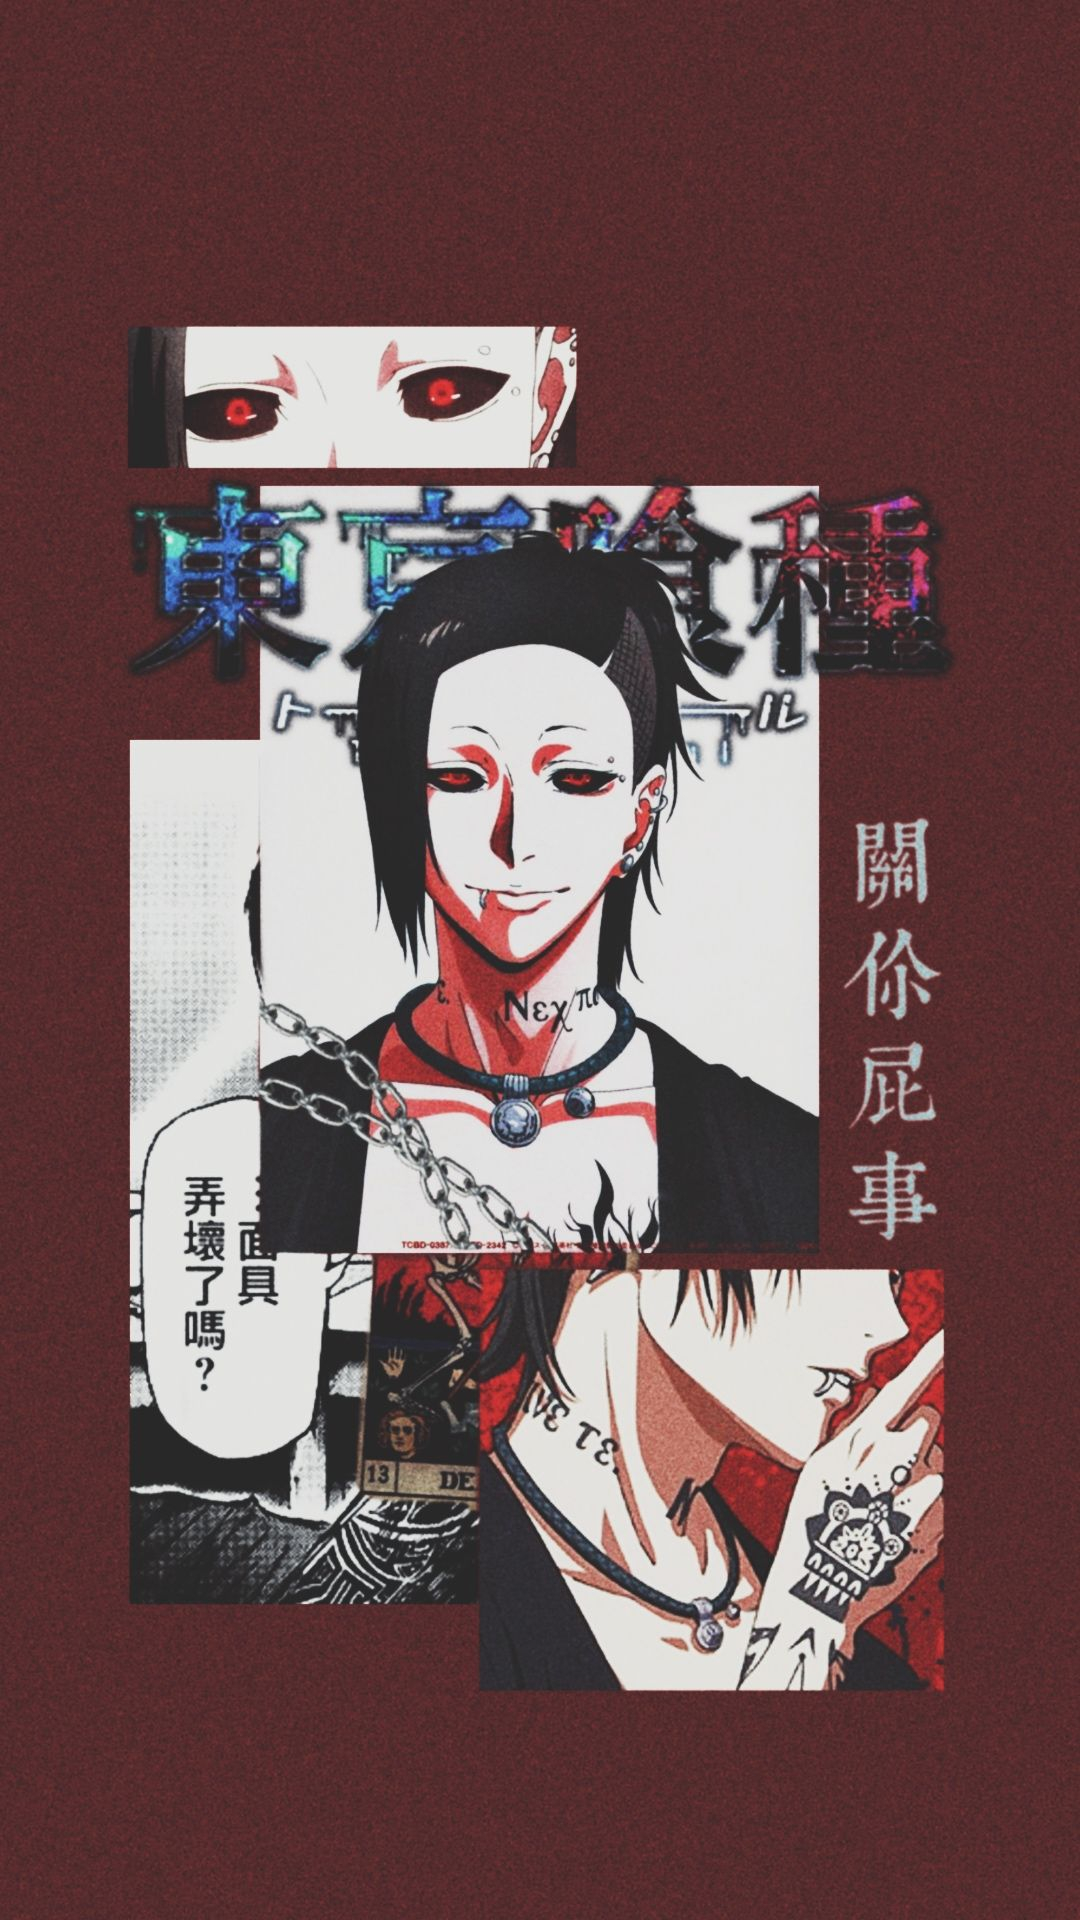 1080x1920 uta tokyo ghoul wallpaper Online Discount Shop for Electronics, Apparel, Toys, Books, Games, Computers, Shoes, Jewelry, Watches, Baby Products, Sports \u0026 Outdoors, Office Products, Bed \u0026 Bath, Furniture, Tools, Hardware, Automotive